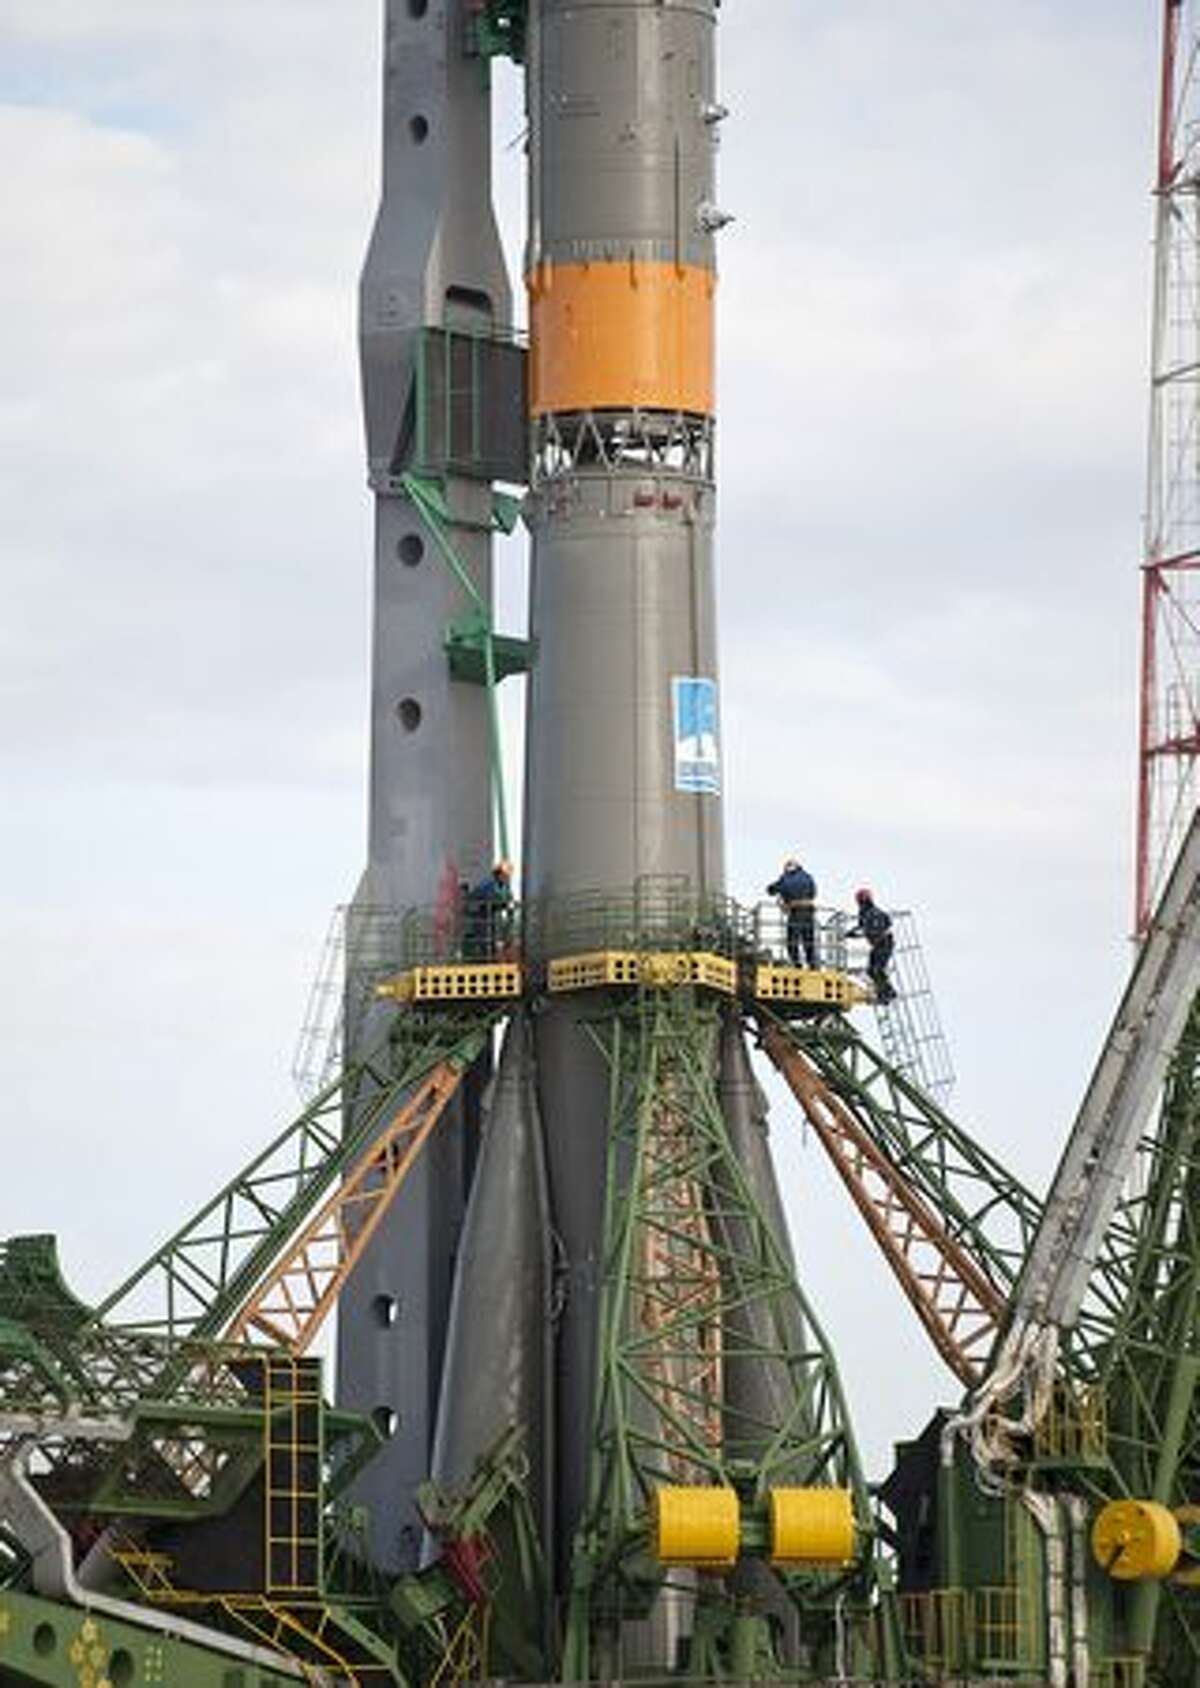 Pad technicians secure the Soyuz TMA-18 spacecraft shortly after it was rolled out by train to the launch pad at the Baikonur Cosmodrome,in Kazakhstan, on March 31, 2010. The launch of the Soyuz spacecraft with Expedition 23 Soyuz Commander Alexander Skvortsov of Russia, Flight Engineer Mikhail Kornienko of Russia, and NASA Flight Engineer Tracy Caldwell Dyson is scheduled for Friday, April 2, 2010.